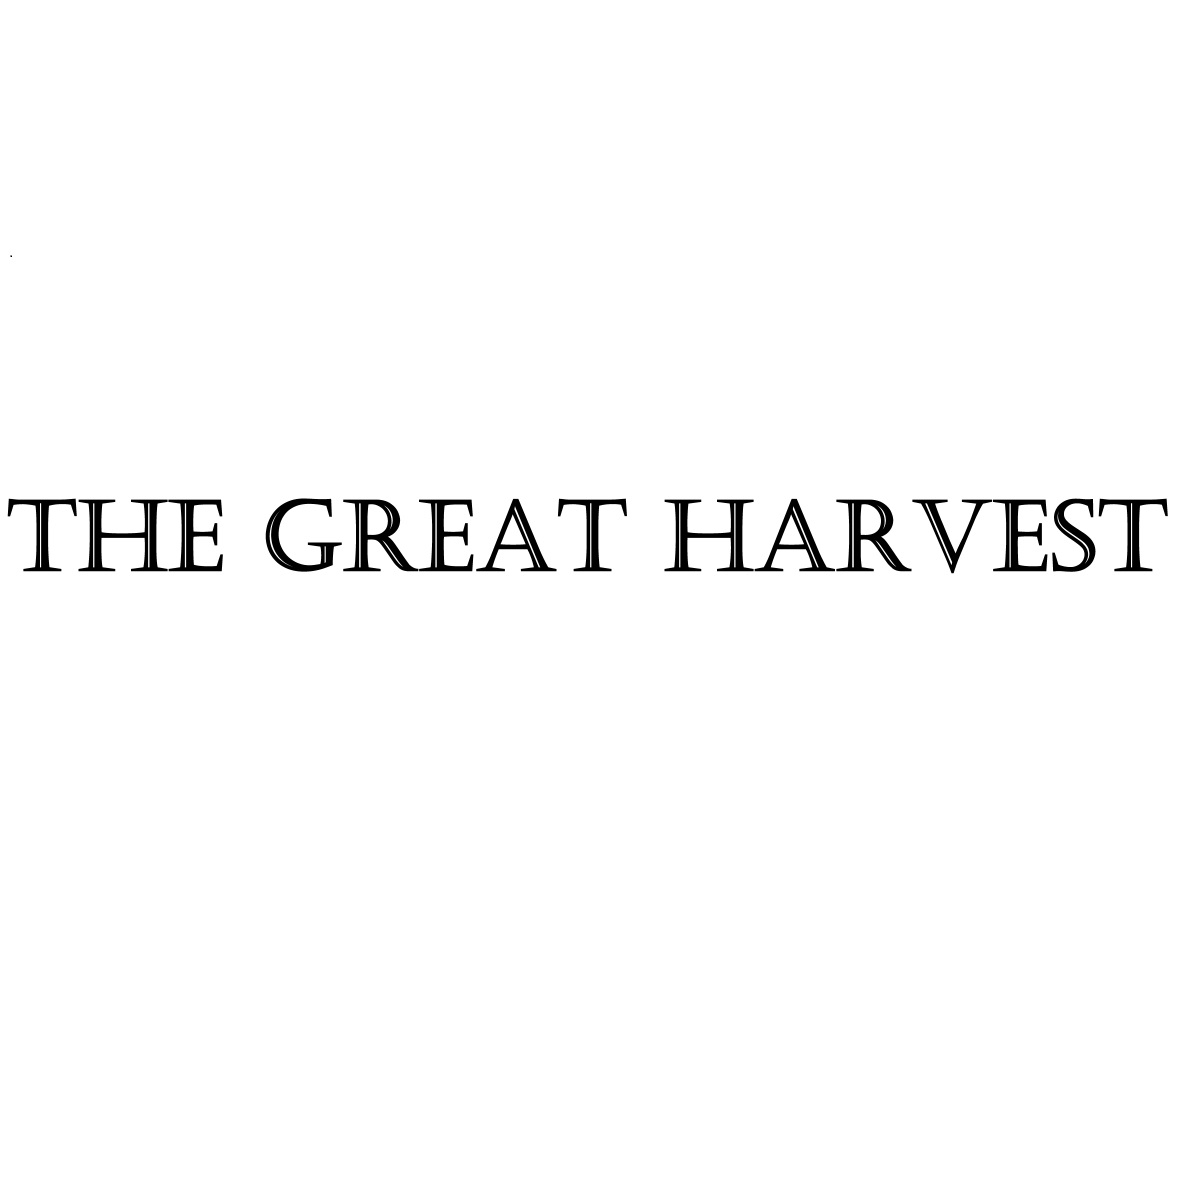 The Great Harvest